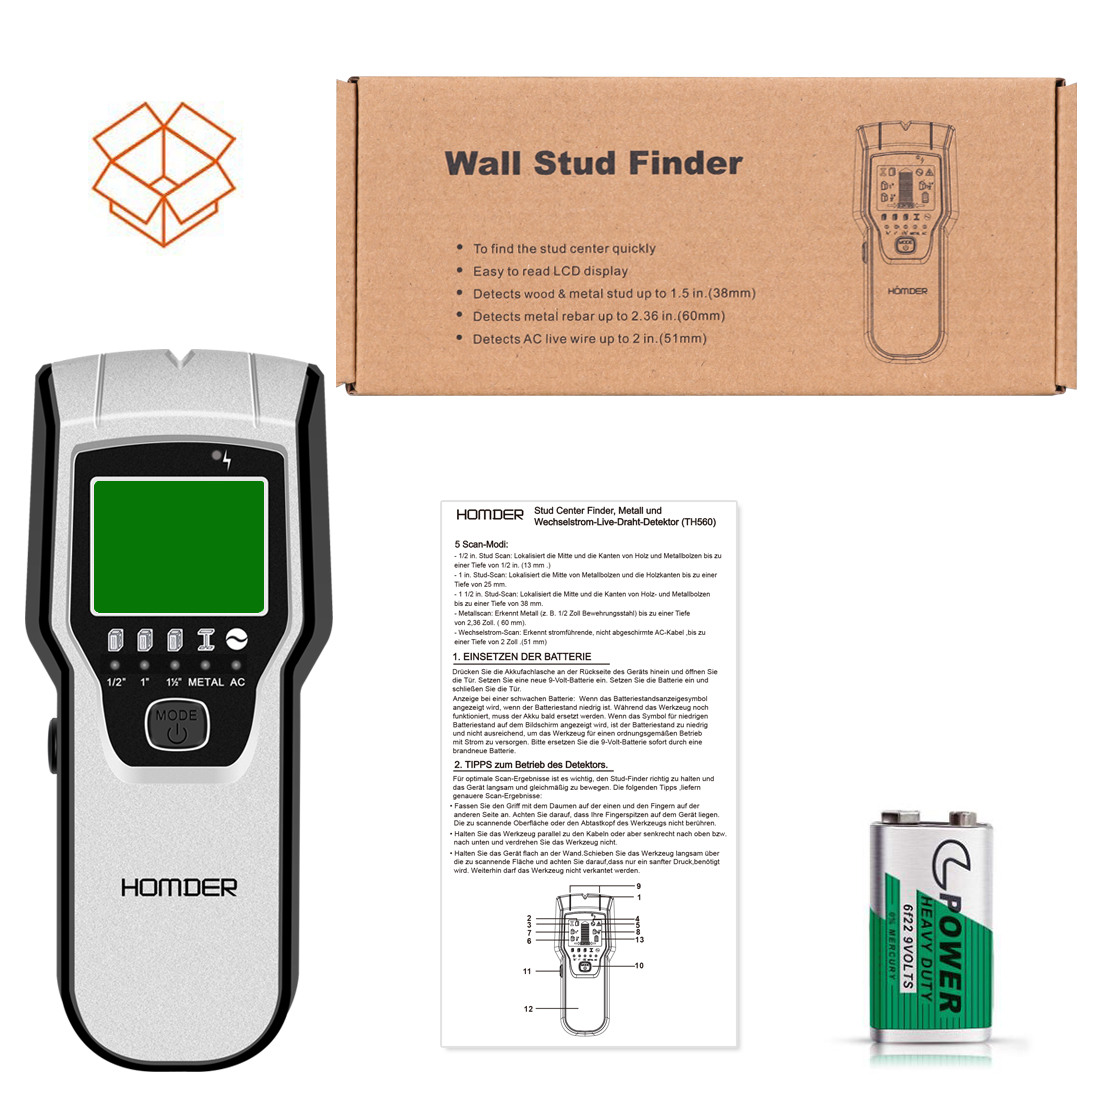 Stud Finder Sensor Wall Scanner,5 in 1 Electronic Wall Center Sensor Detector with Digital LCD Display & Sound Warning for Wood